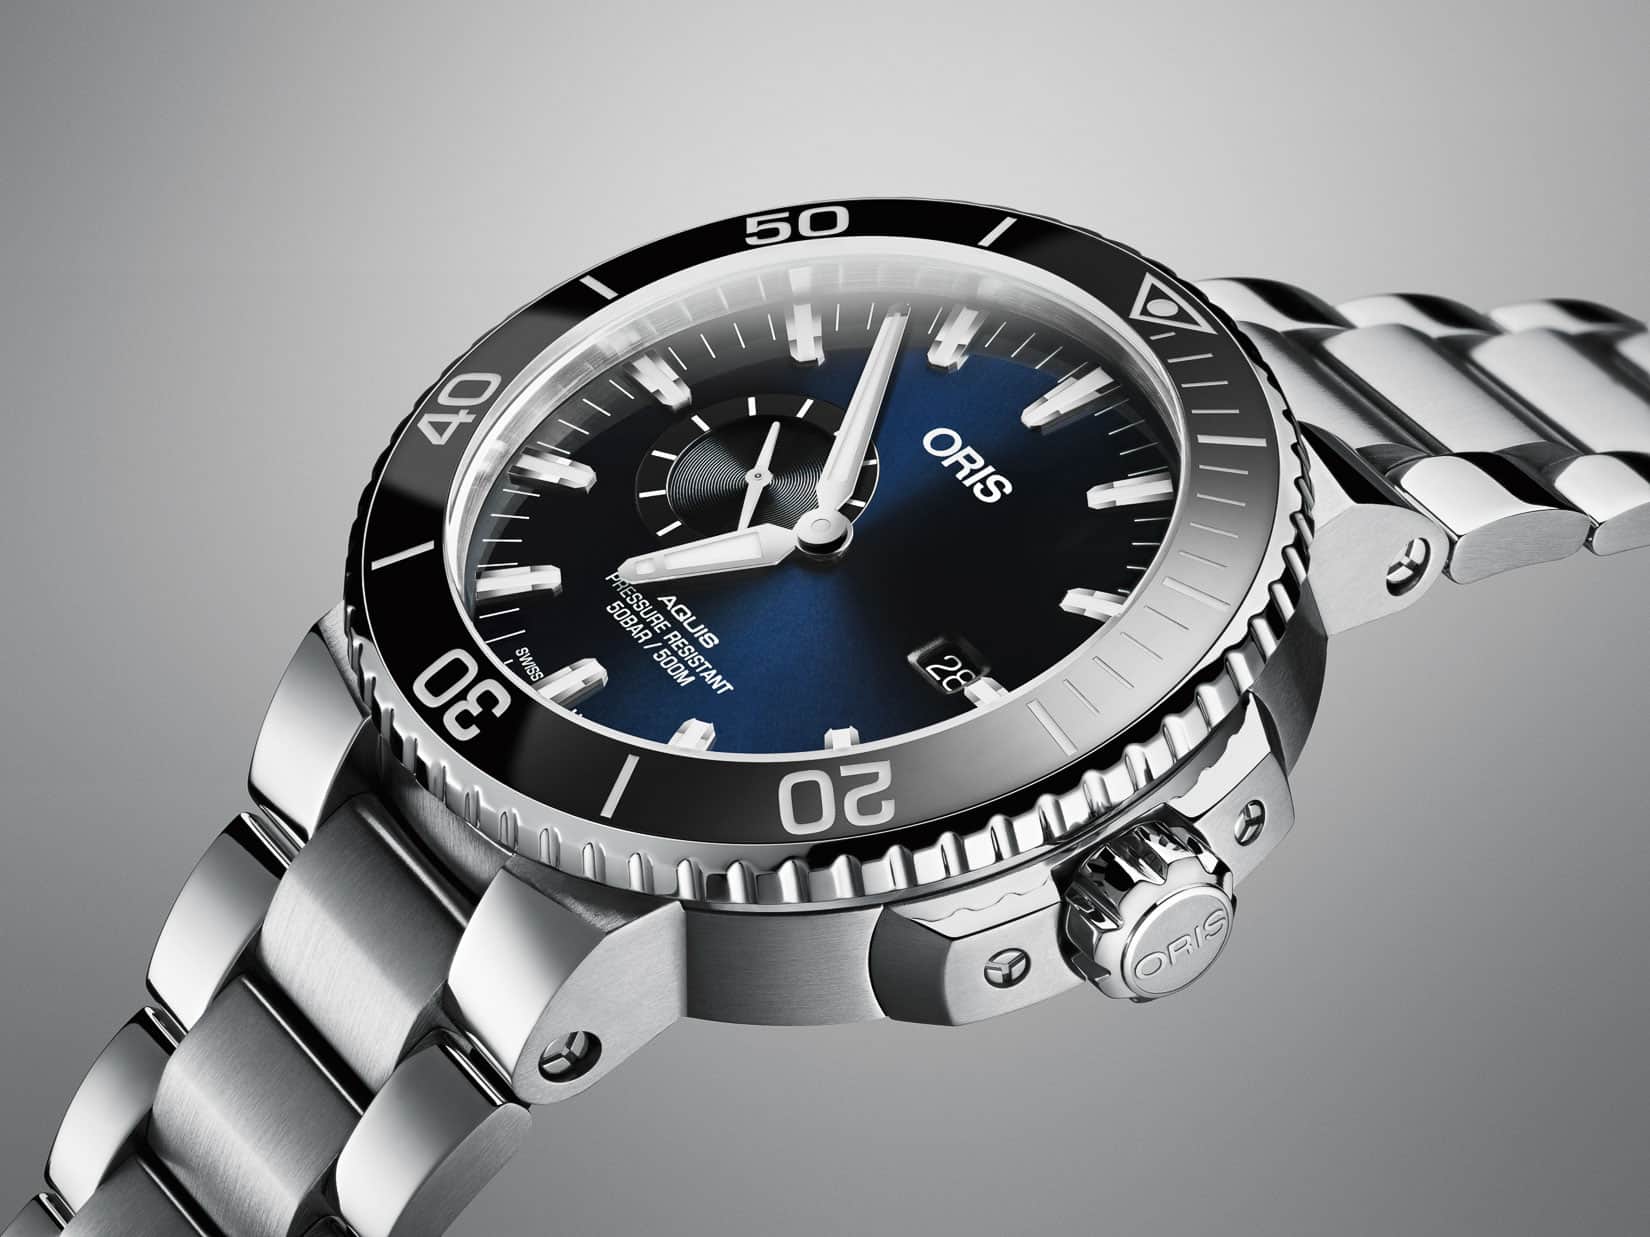 Introducing You To The Oris Aquis Small Second Date